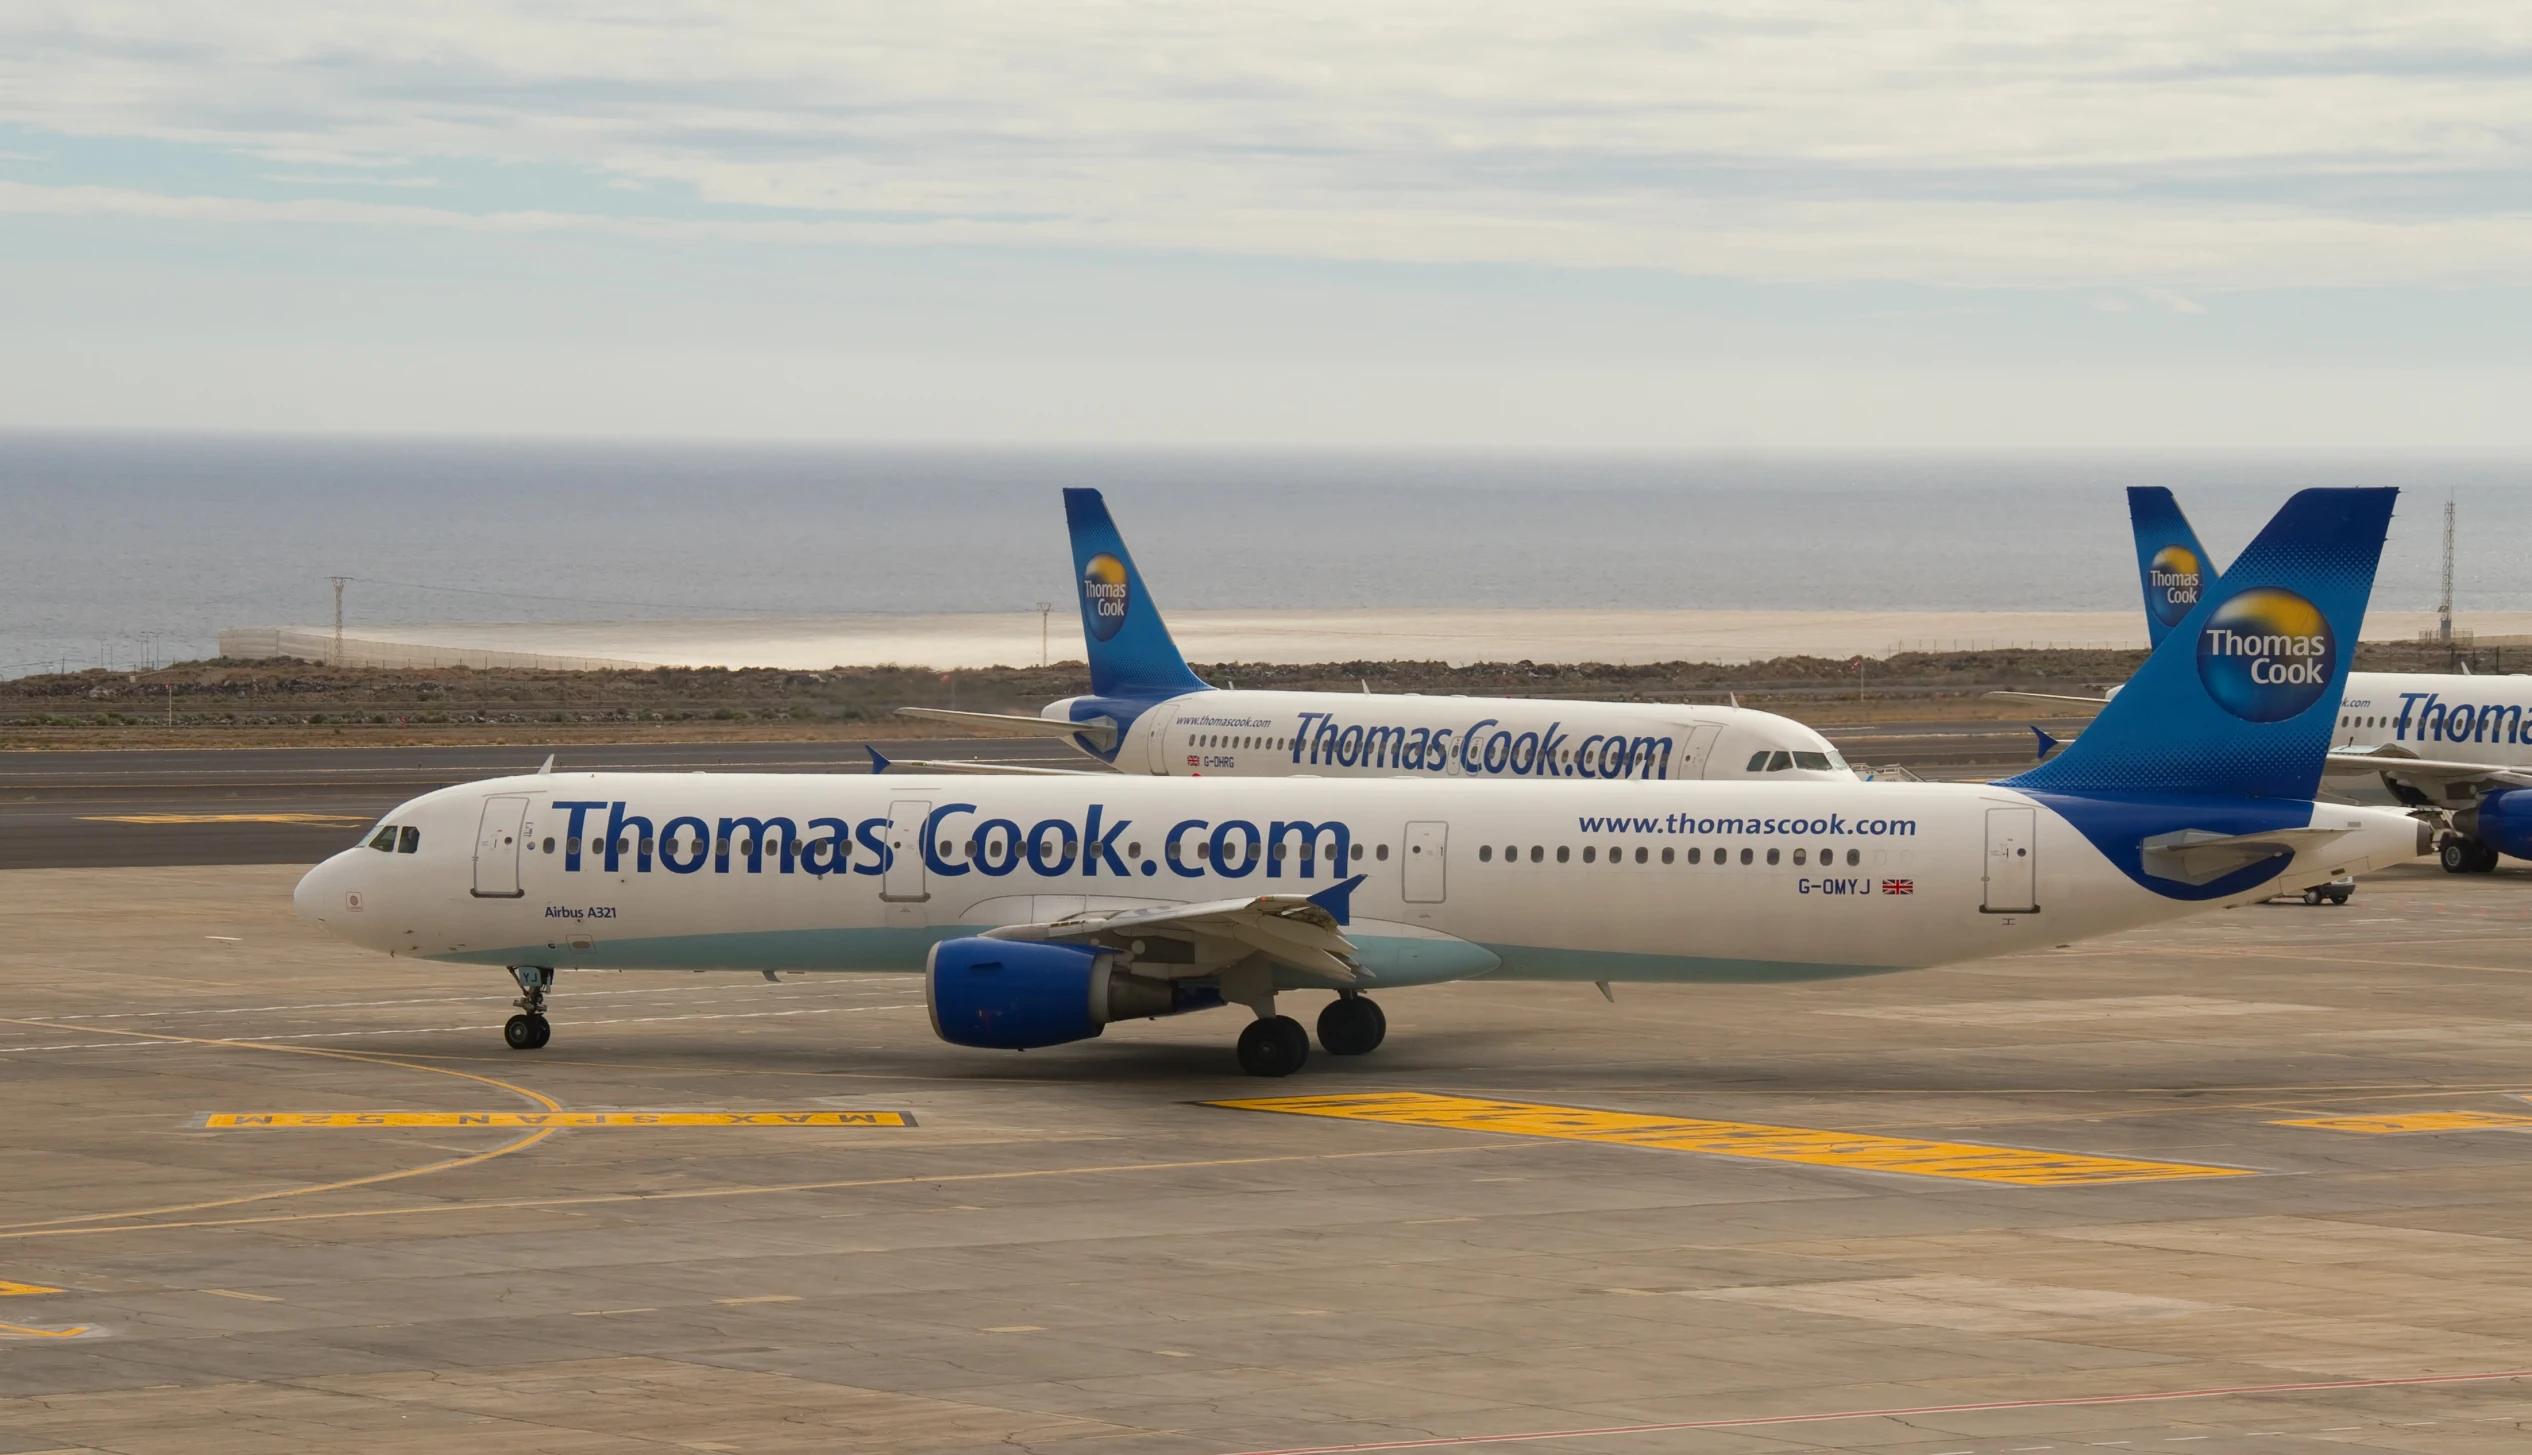 two thomas cook airplanes on a runway near the ocean